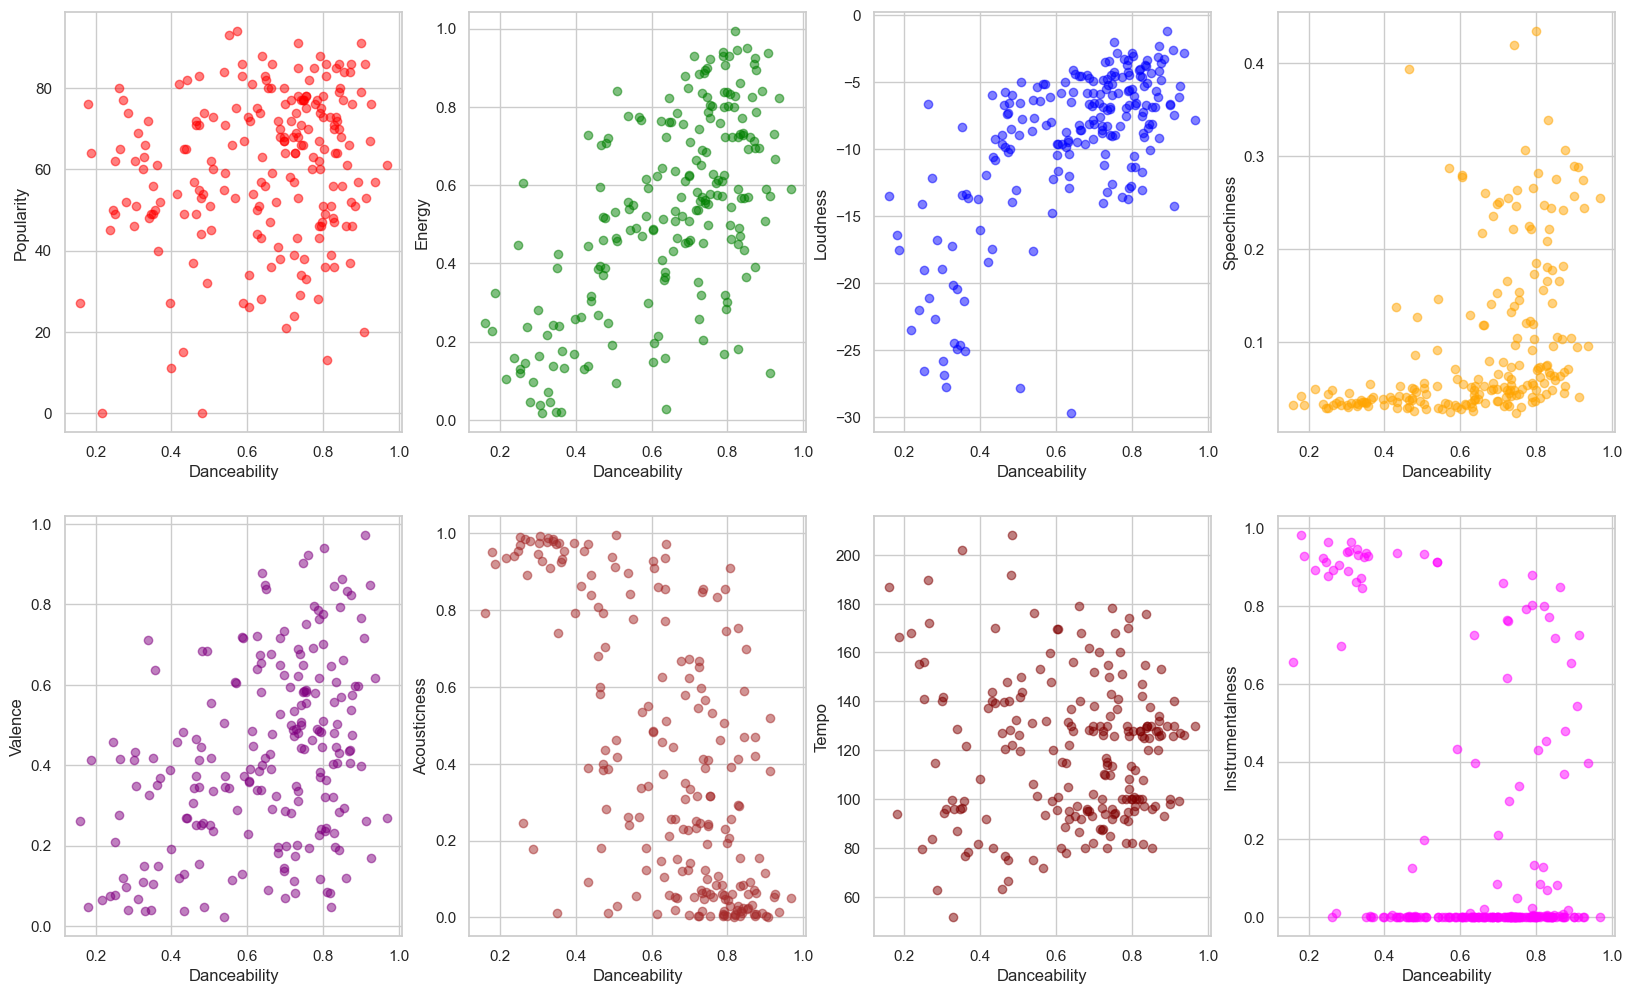 Scatter plots of danceability against other features